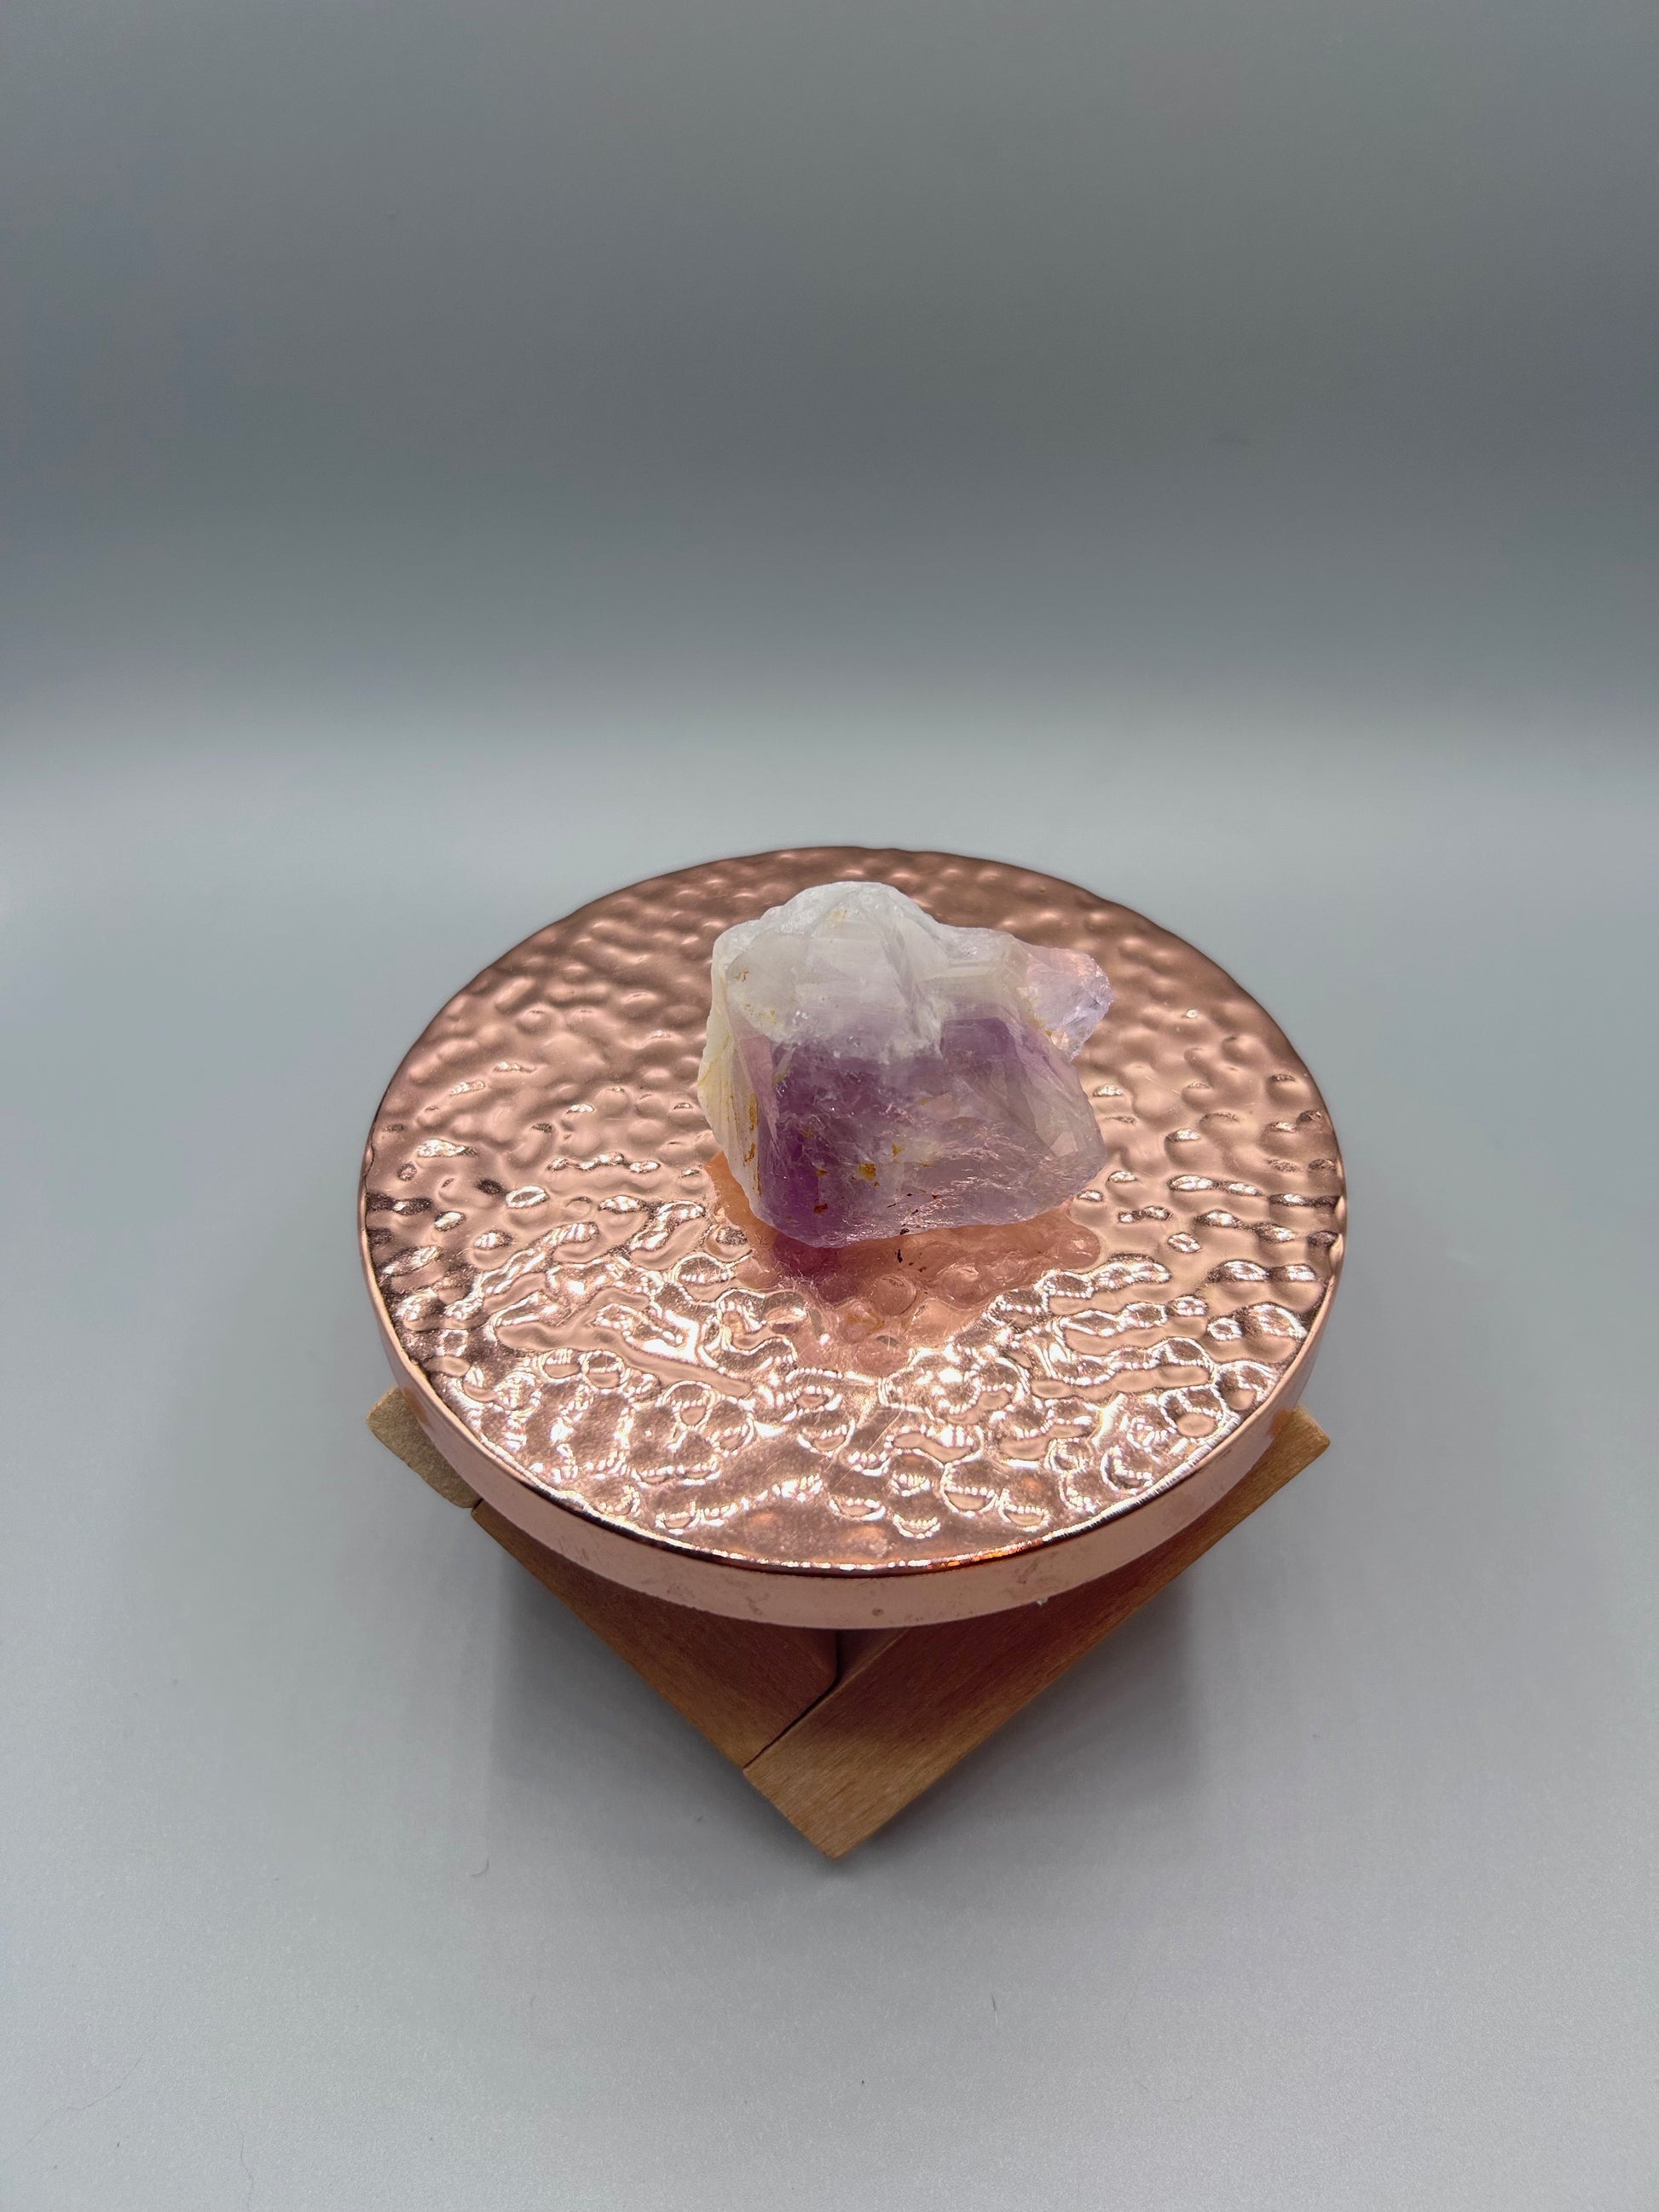 raw amethyst crystal posed inside on copper plate.